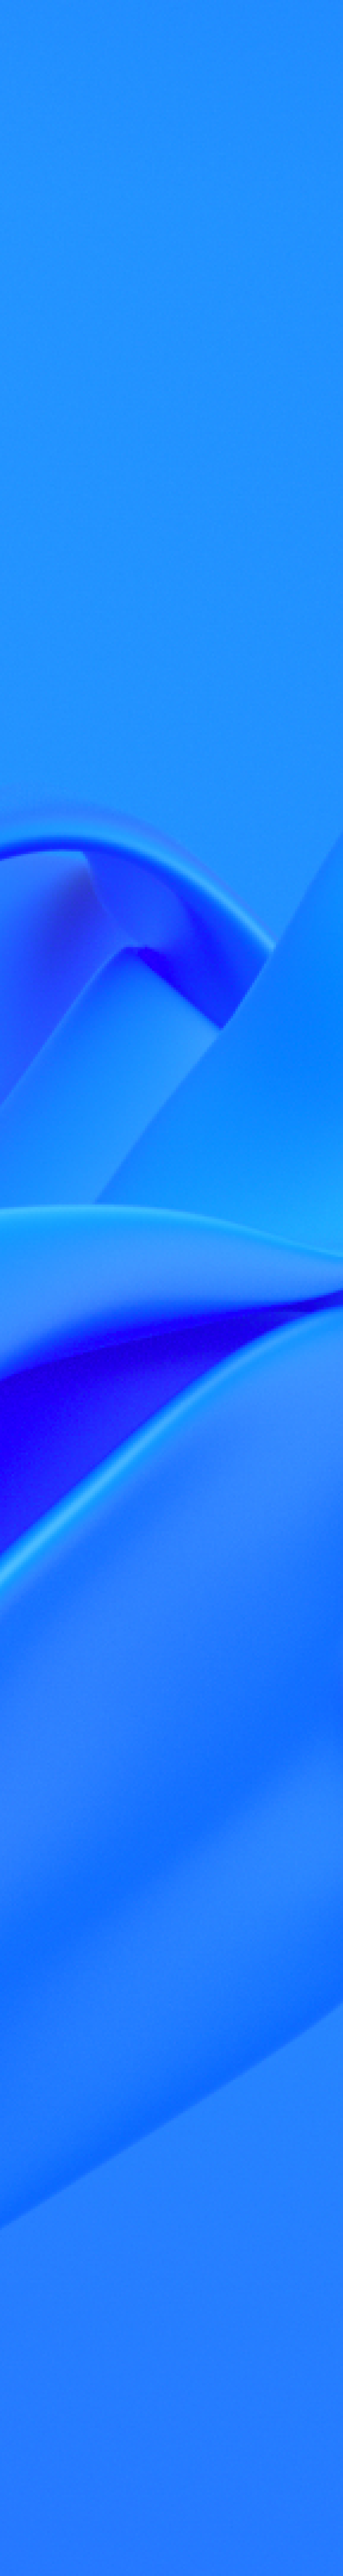 800x6002 Resolution Windows 11 Style Abstract 800x6002 Resolution ...